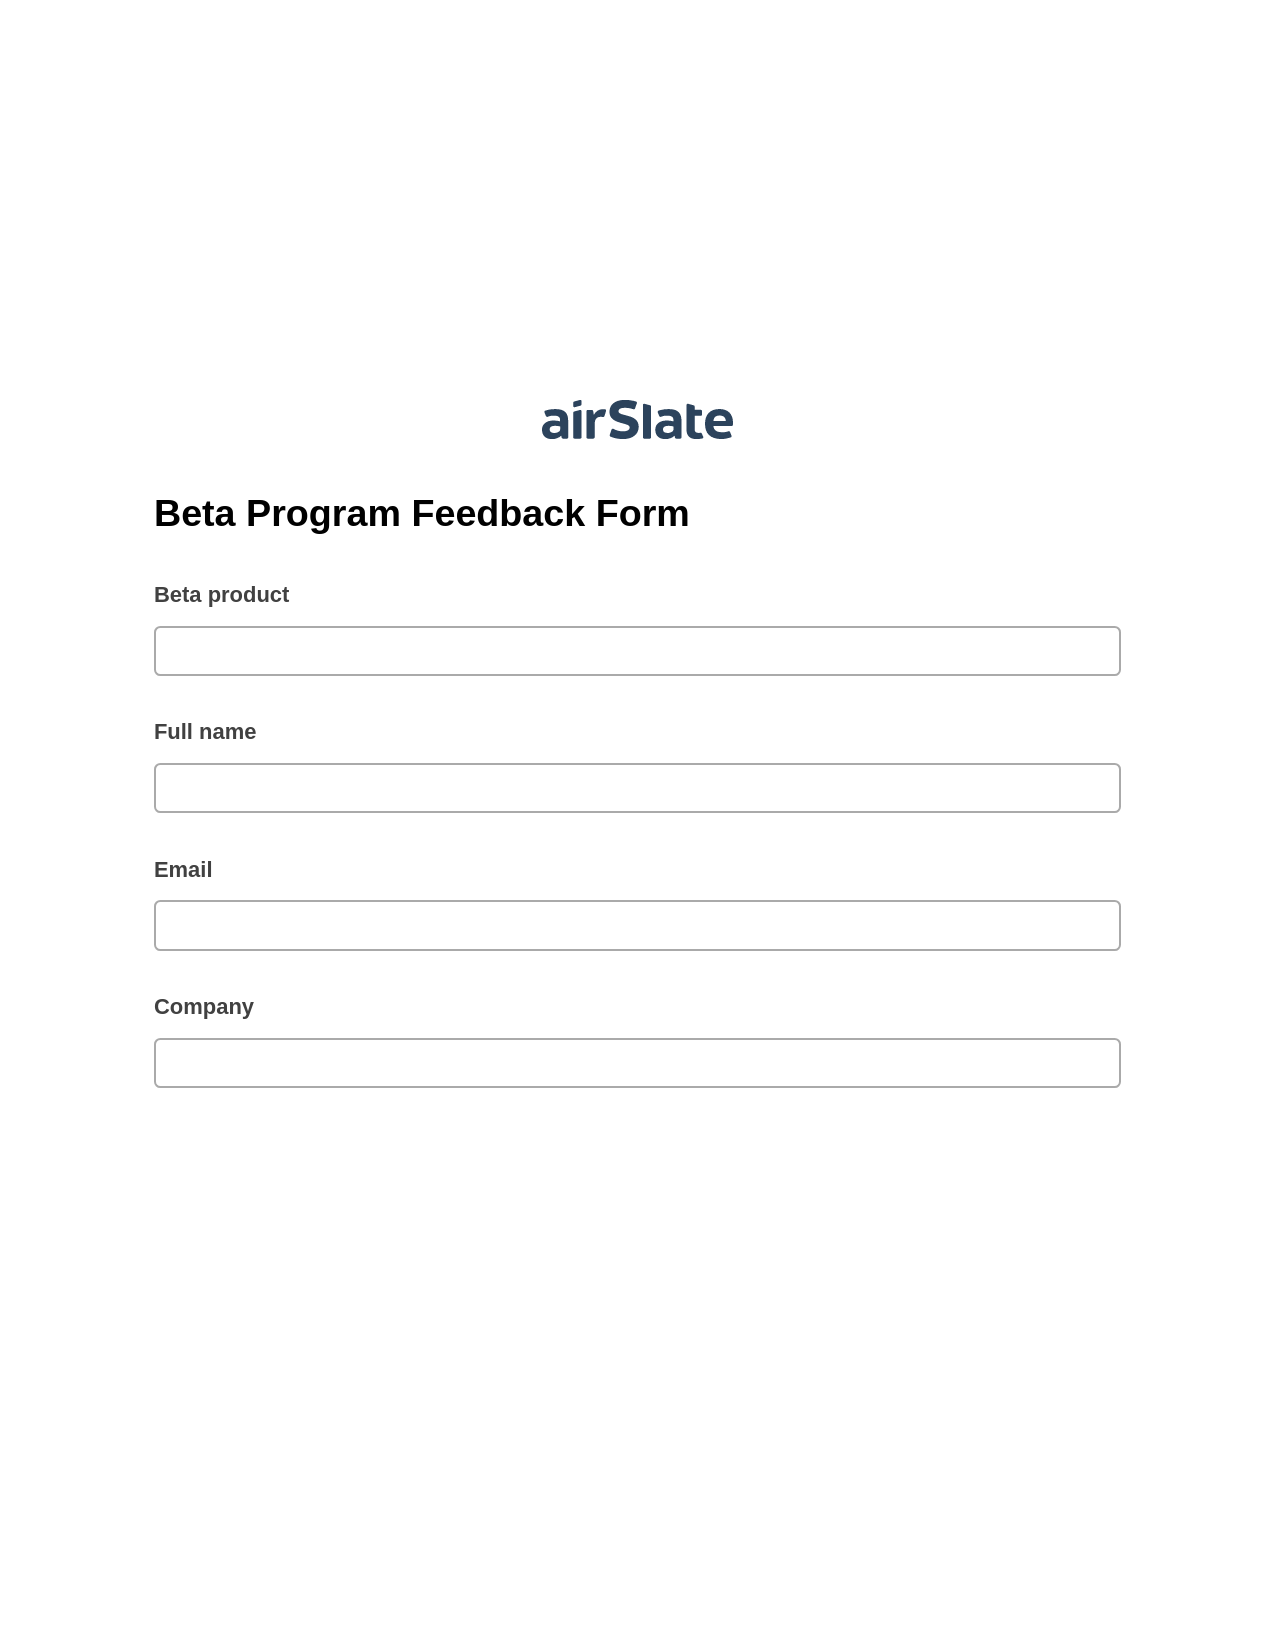 Multirole Beta Program Feedback Form Pre-fill from Salesforce Record Bot, Add Tags to Slate Bot, Export to Excel 365 Bot